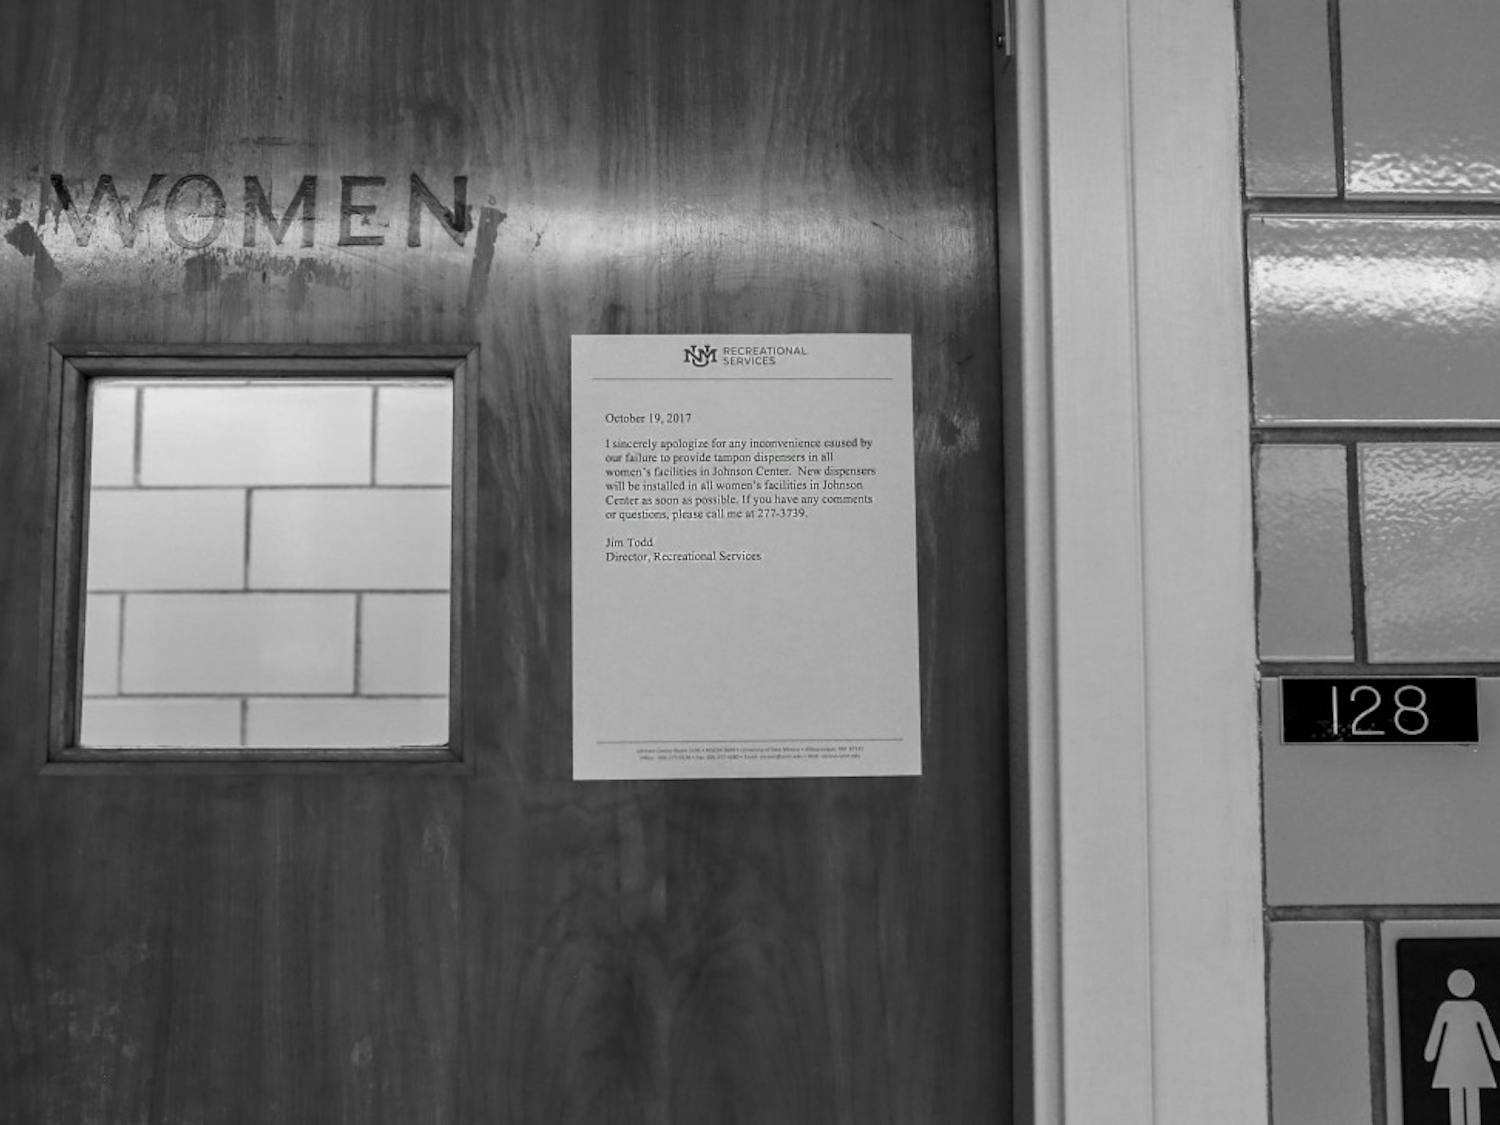 A sign apologizing for the lack of tampon dispensers is displayed outside a women?s restroom at Johnson Gym on Oct. 20, 2017. 

